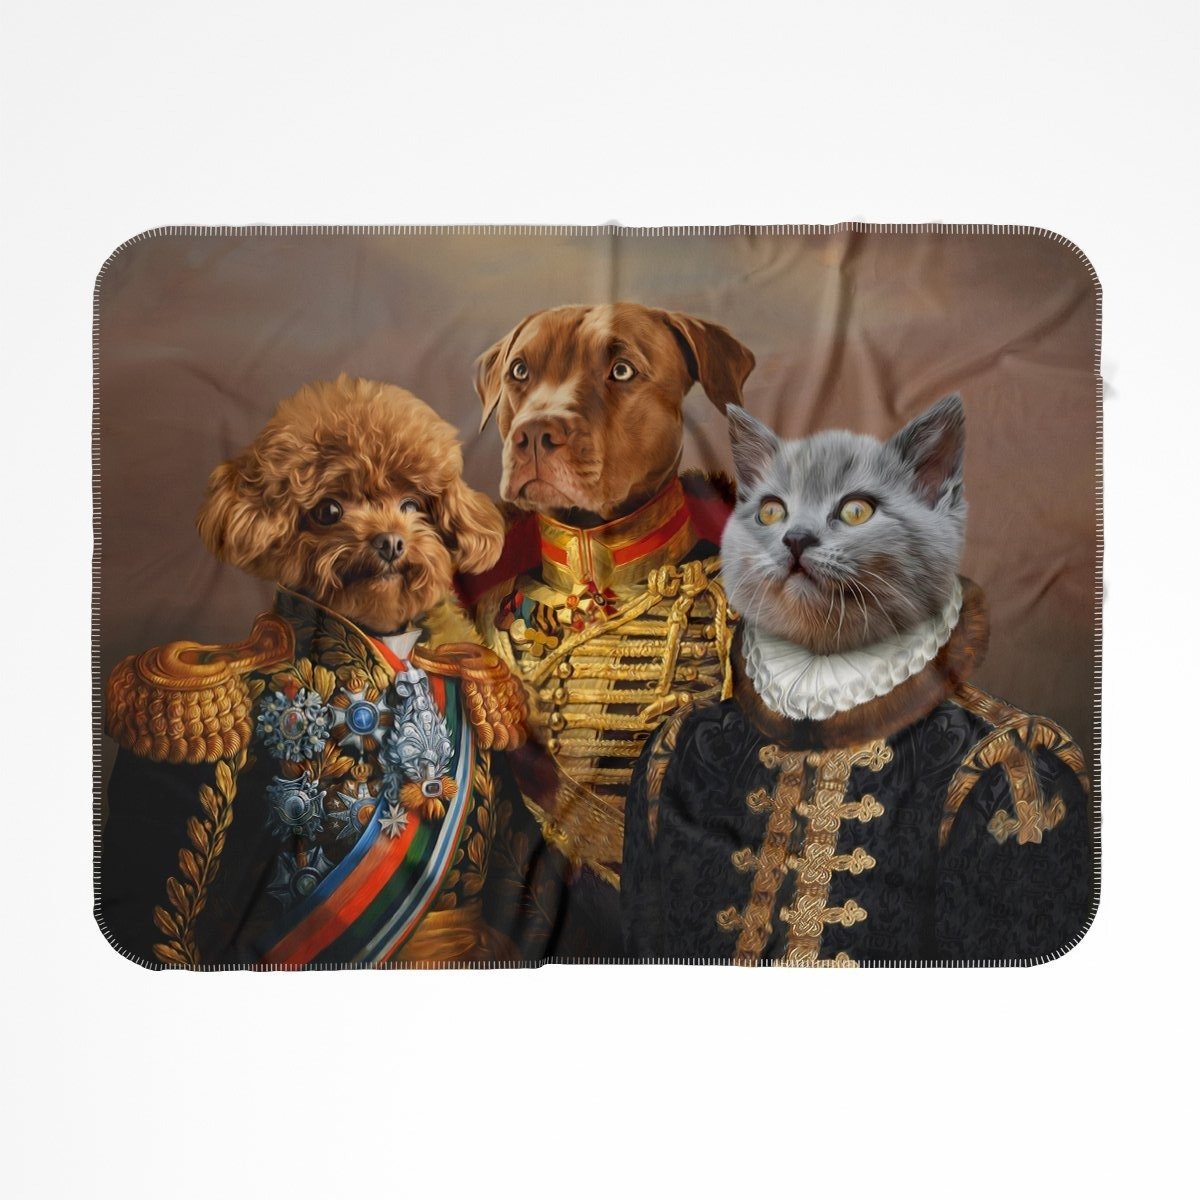 The 3 Brothers In Arms: Custom Pet Blanket - Paw & Glory - #pet portraits# - #dog portraits# - #pet portraits uk#Paw and glory, Pet portraits blanket,blanket with animal, personalised cat blanket, christmas dog blankets, fleece blanket for cat, dog blanket cheap